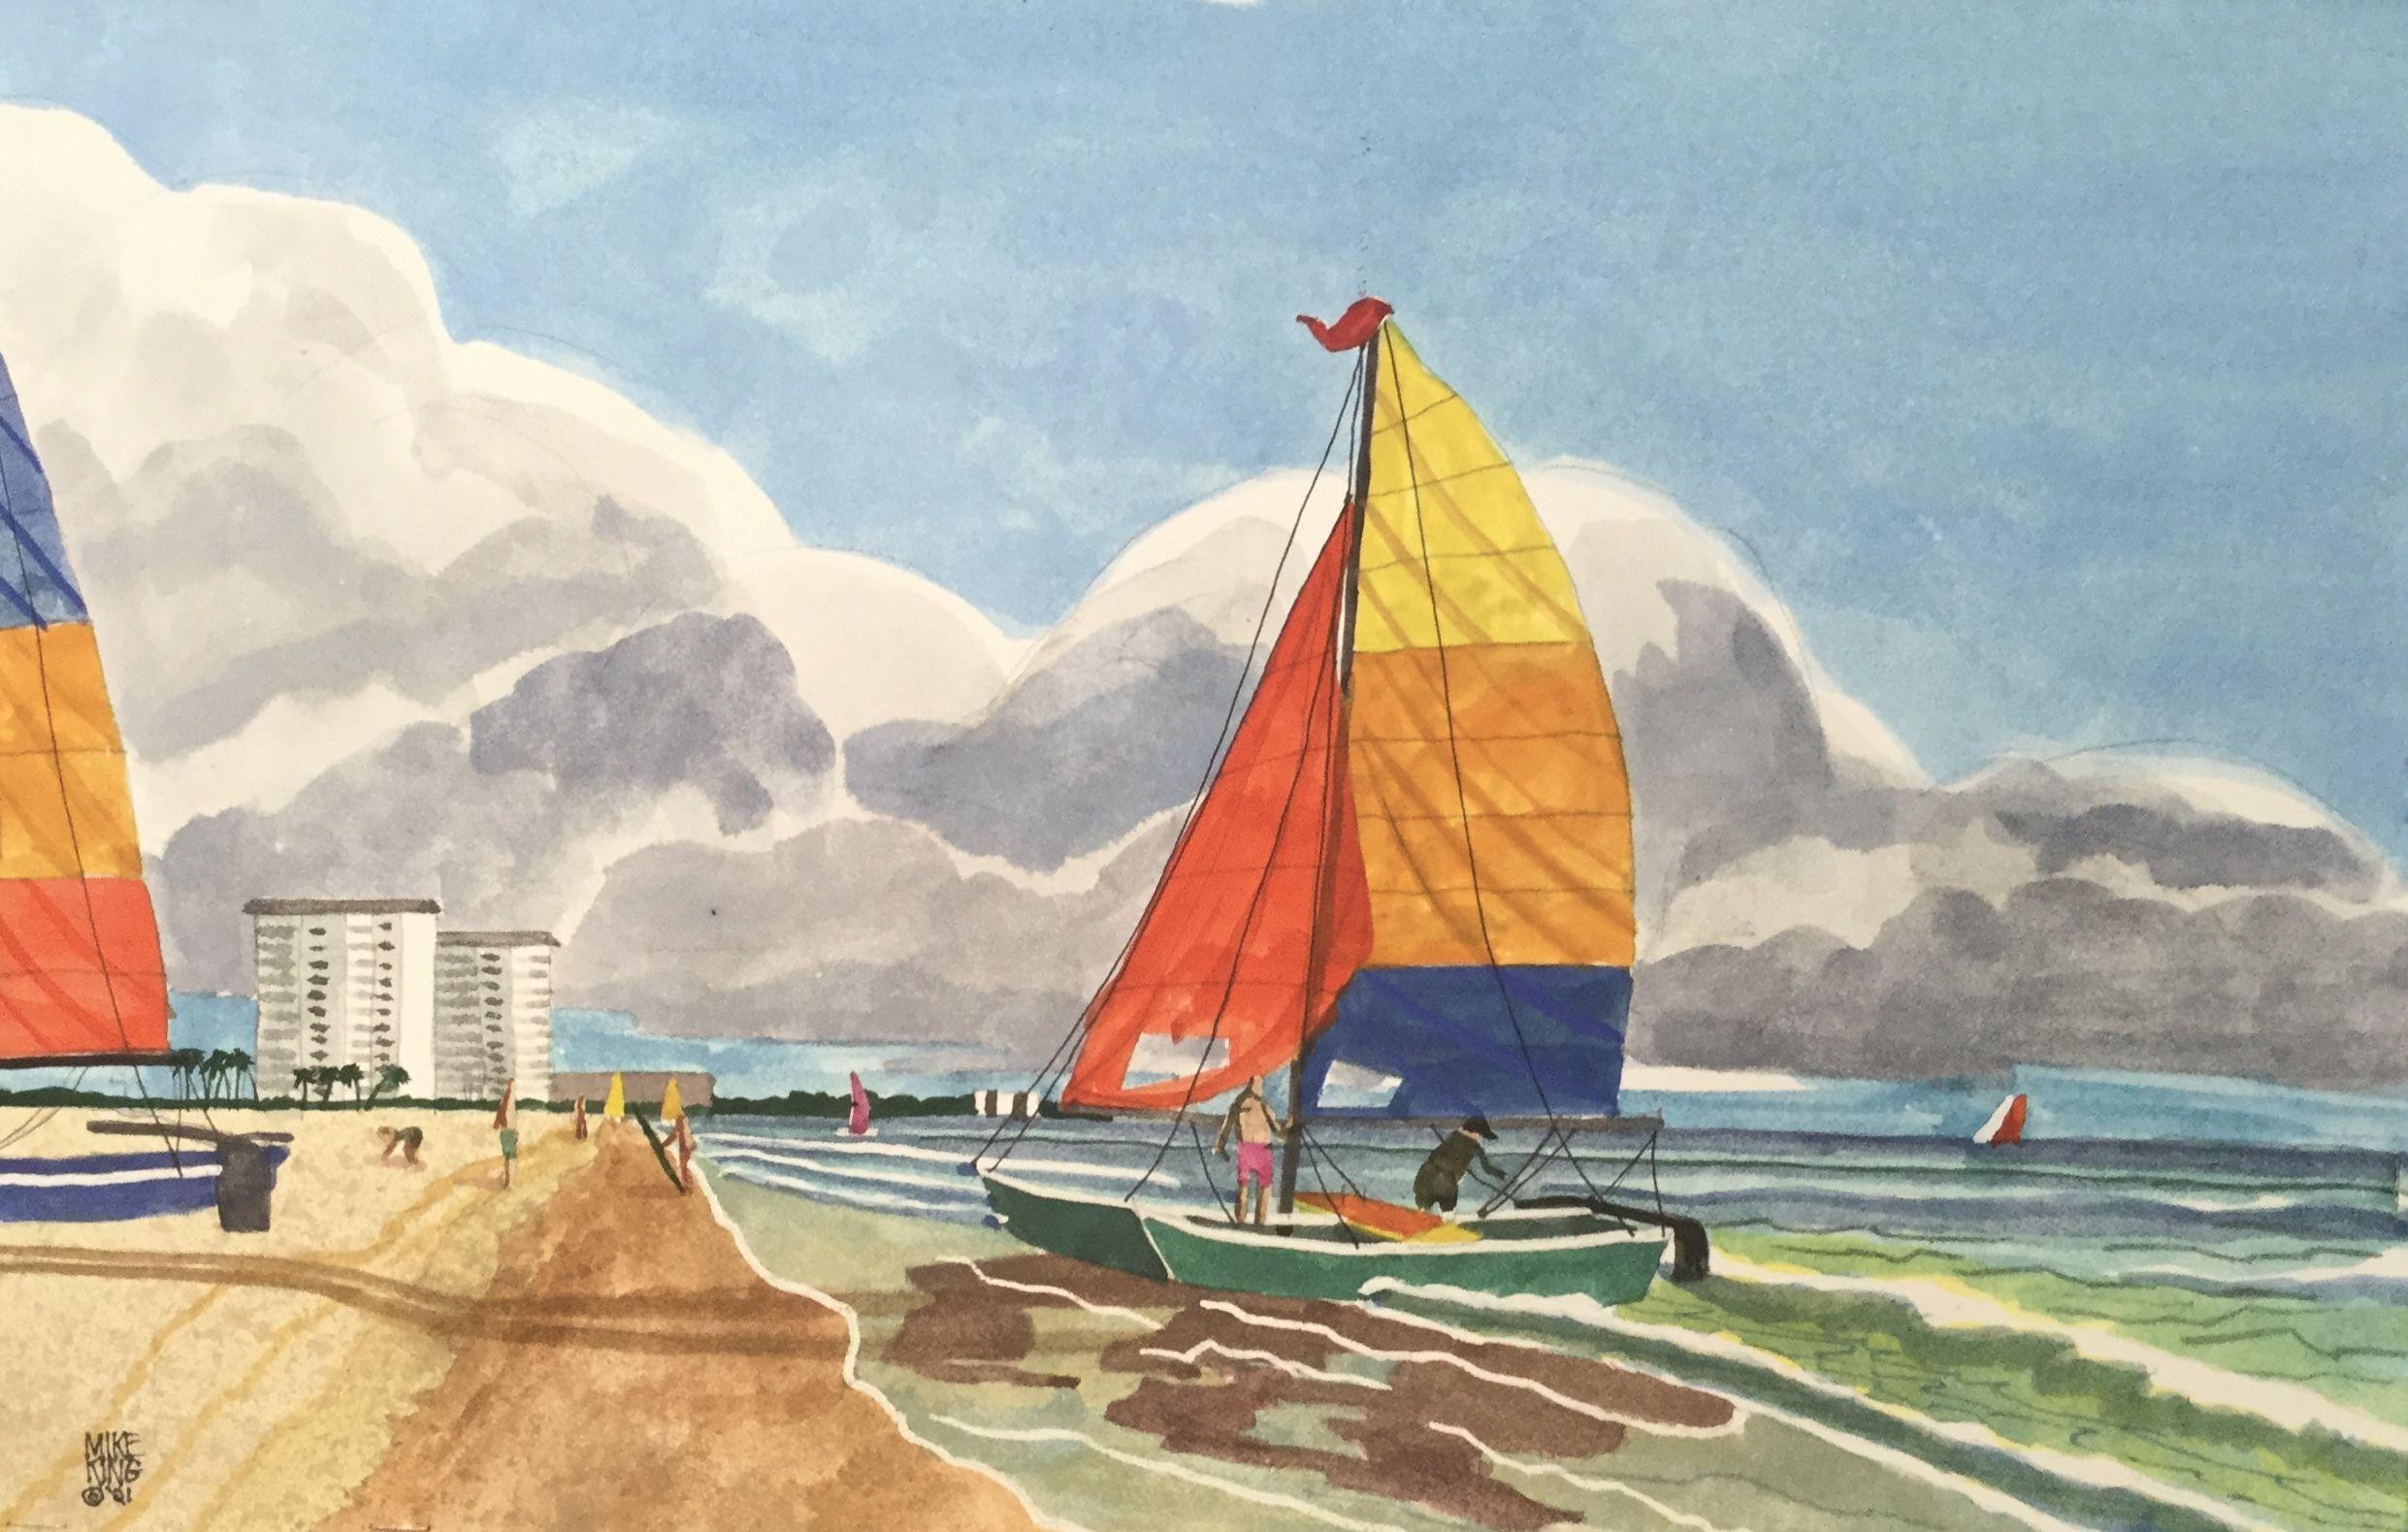 Catamarans on Lido Beach, Sarasota, Florida, Painting, Watercolor on Paper - Art by Mike King